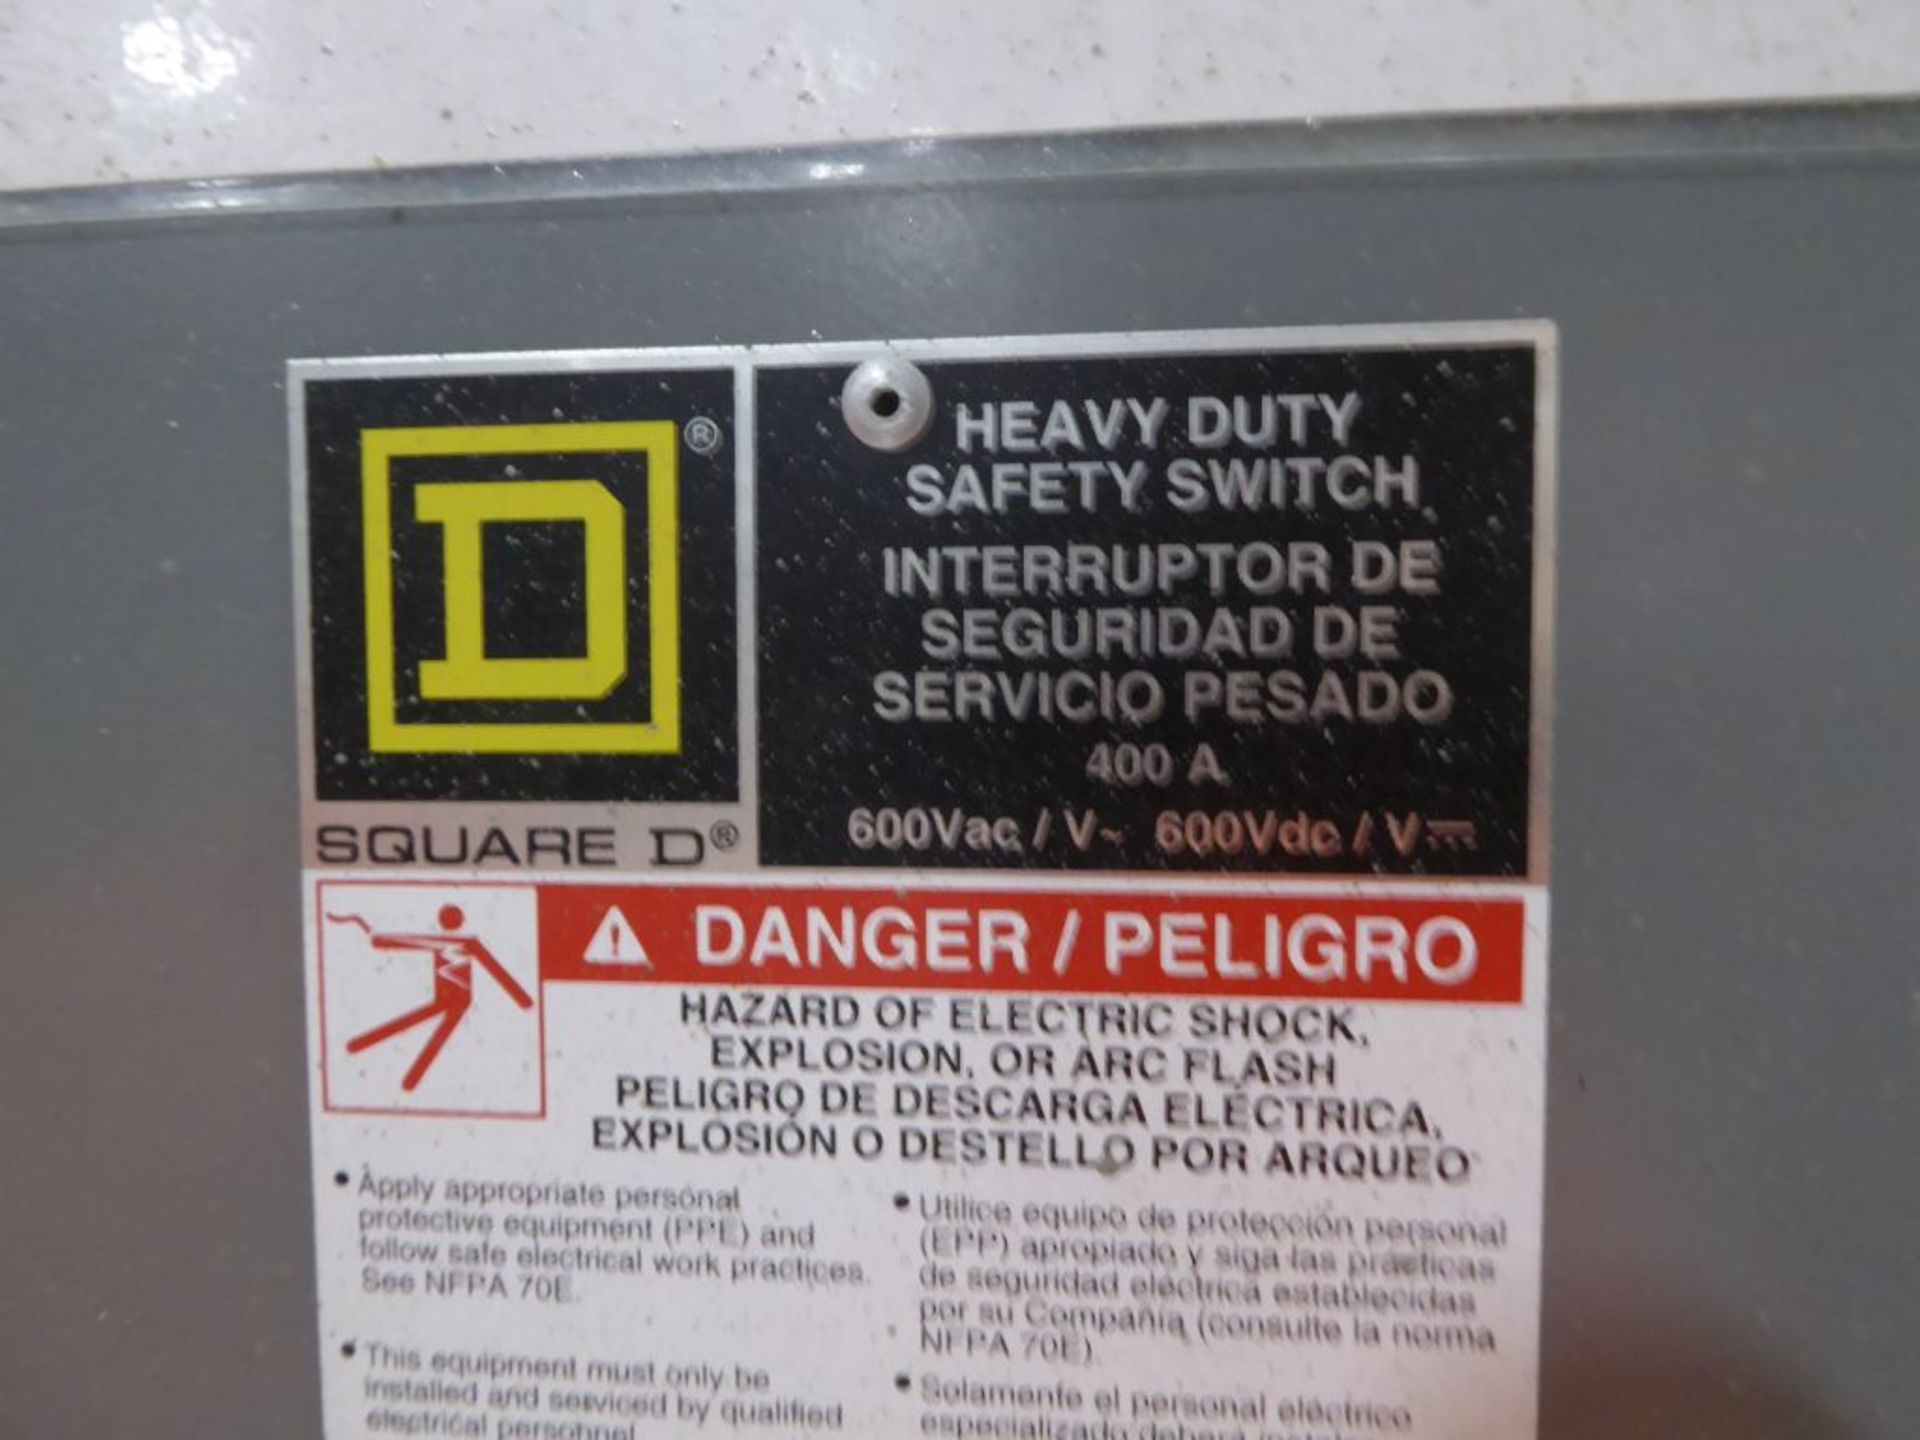 Square D Heavy Duty Safety Switch - Image 2 of 12